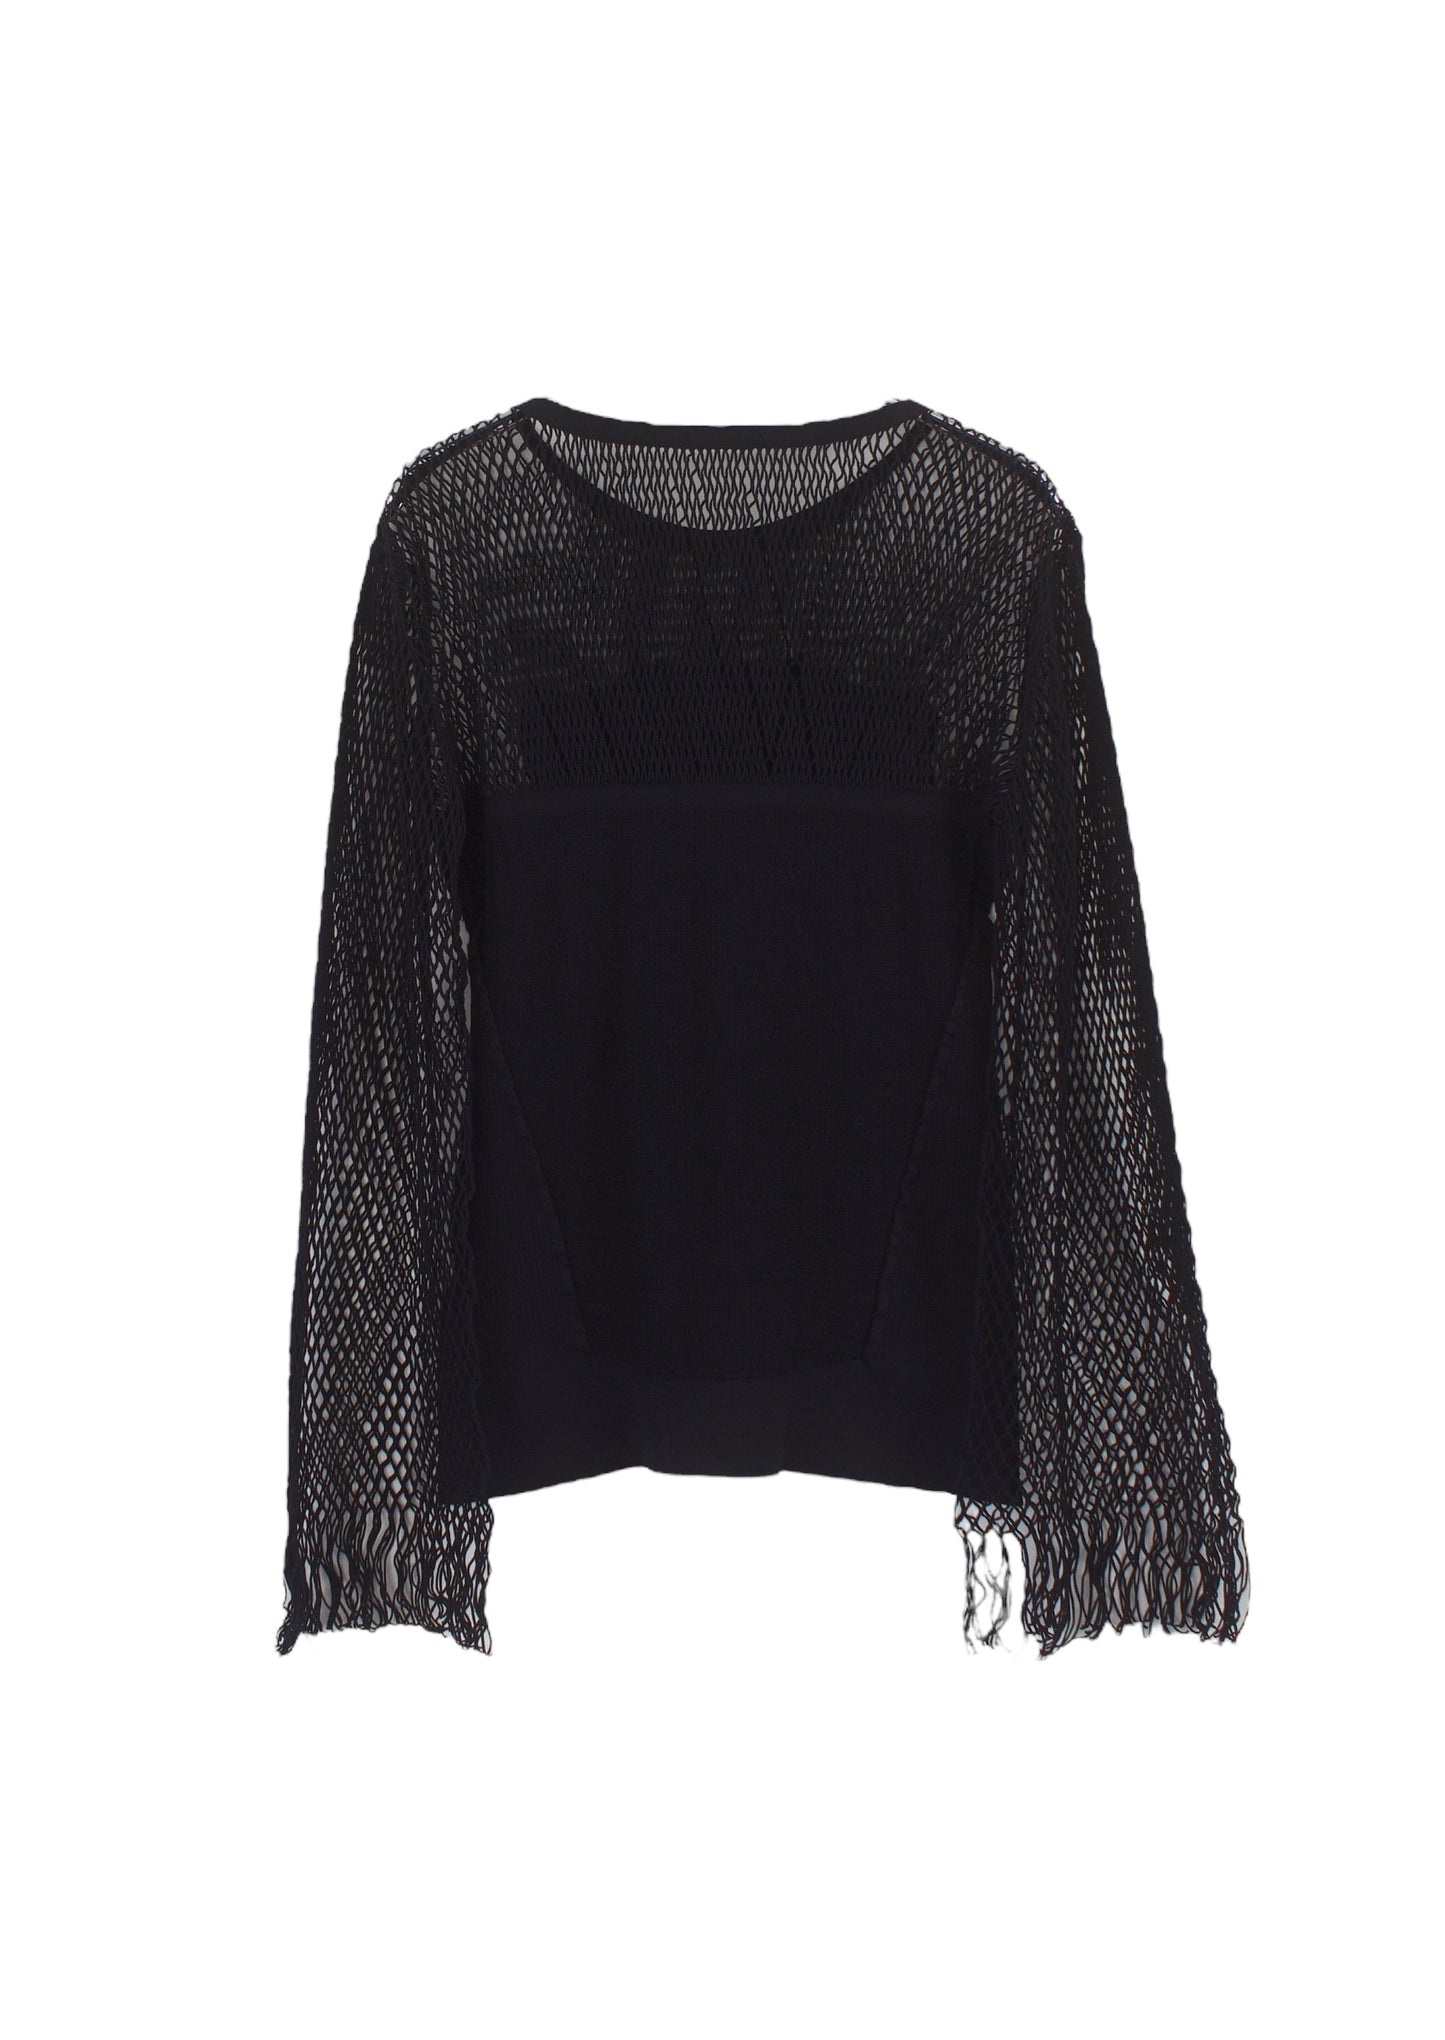 " The Sun " Lace knit pullover